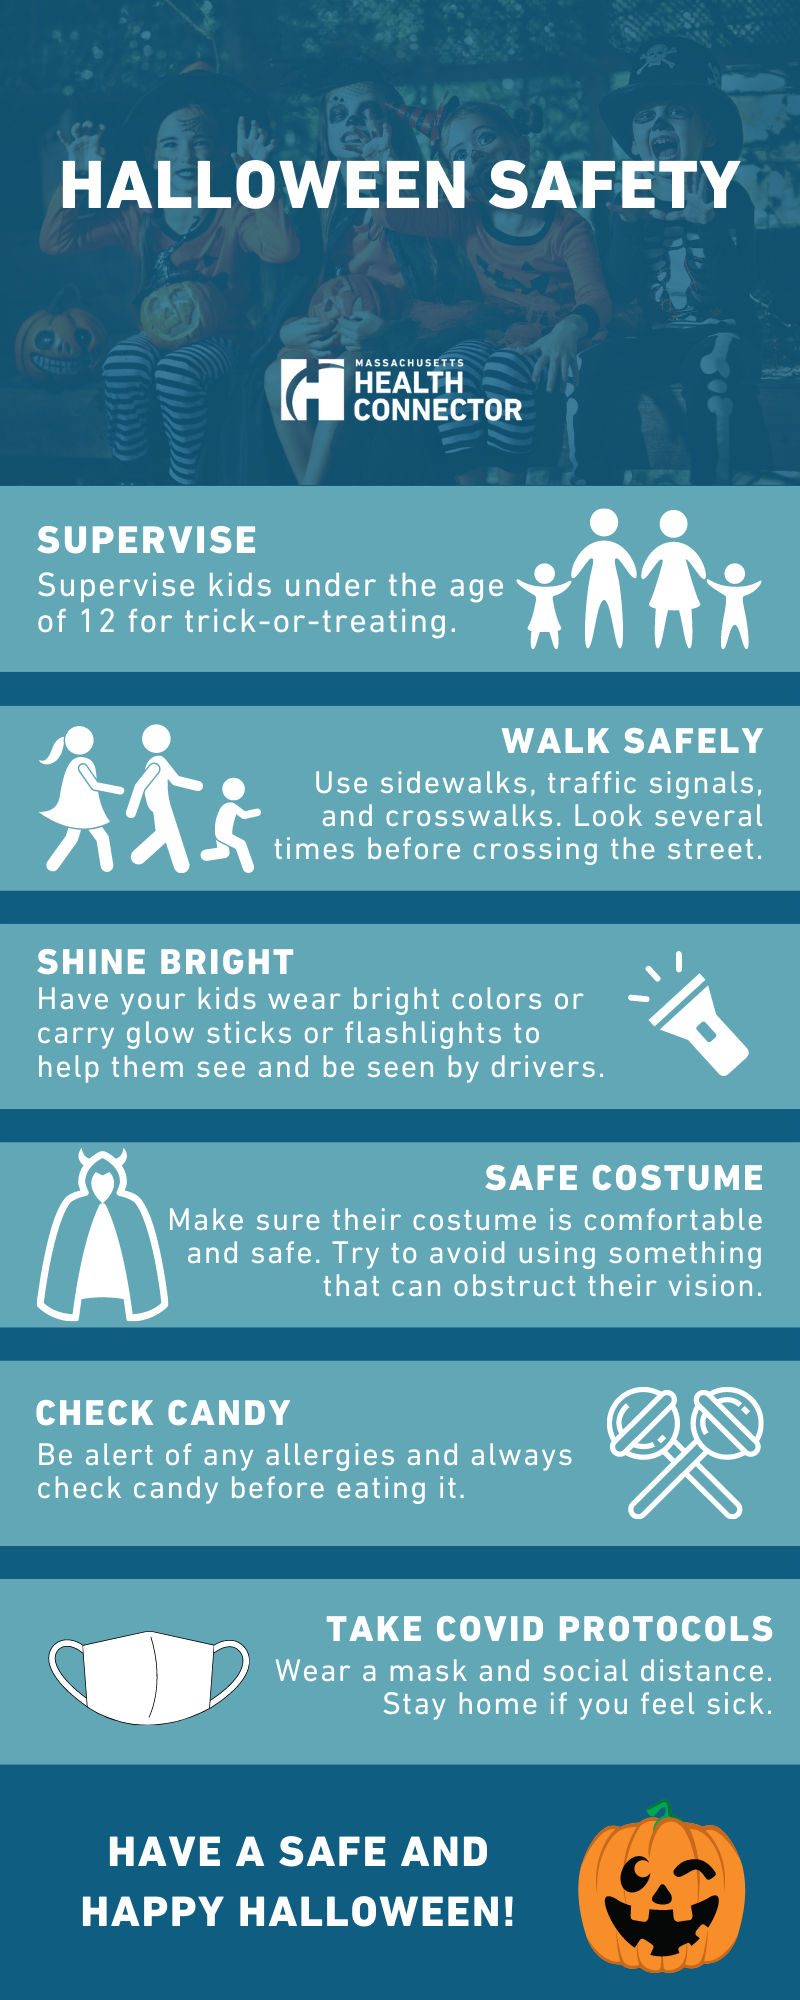 Halloween Safety Infographic